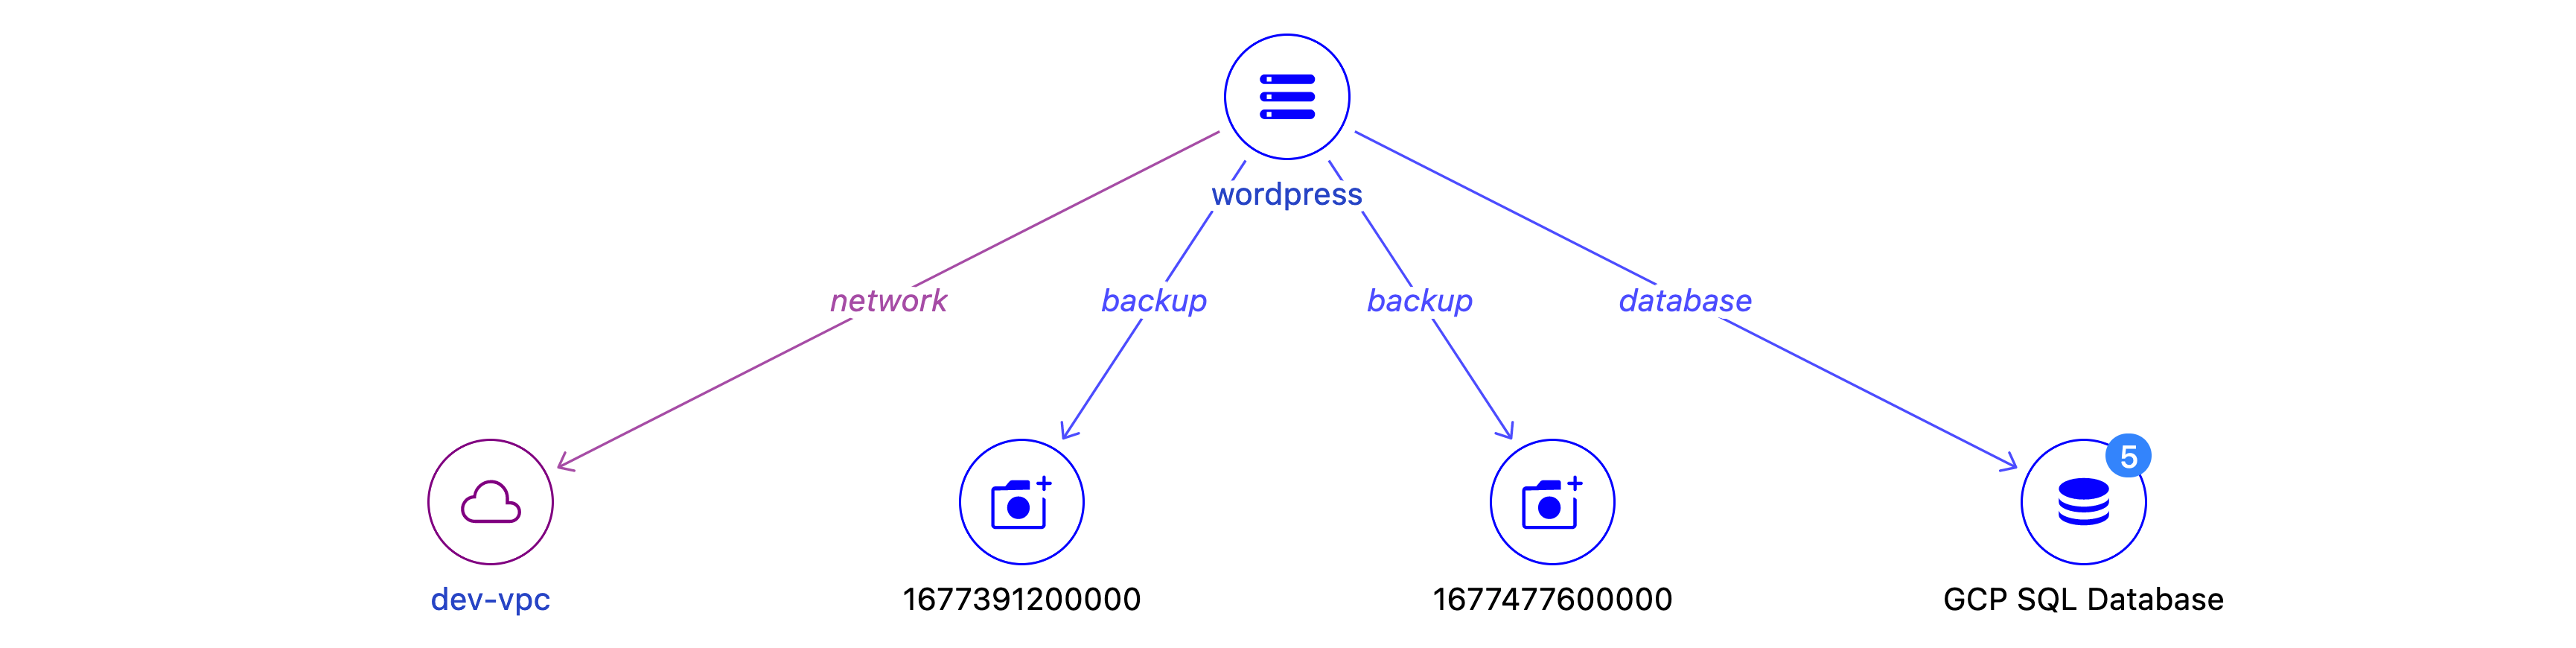 Steampipe Relationship Graph - Database